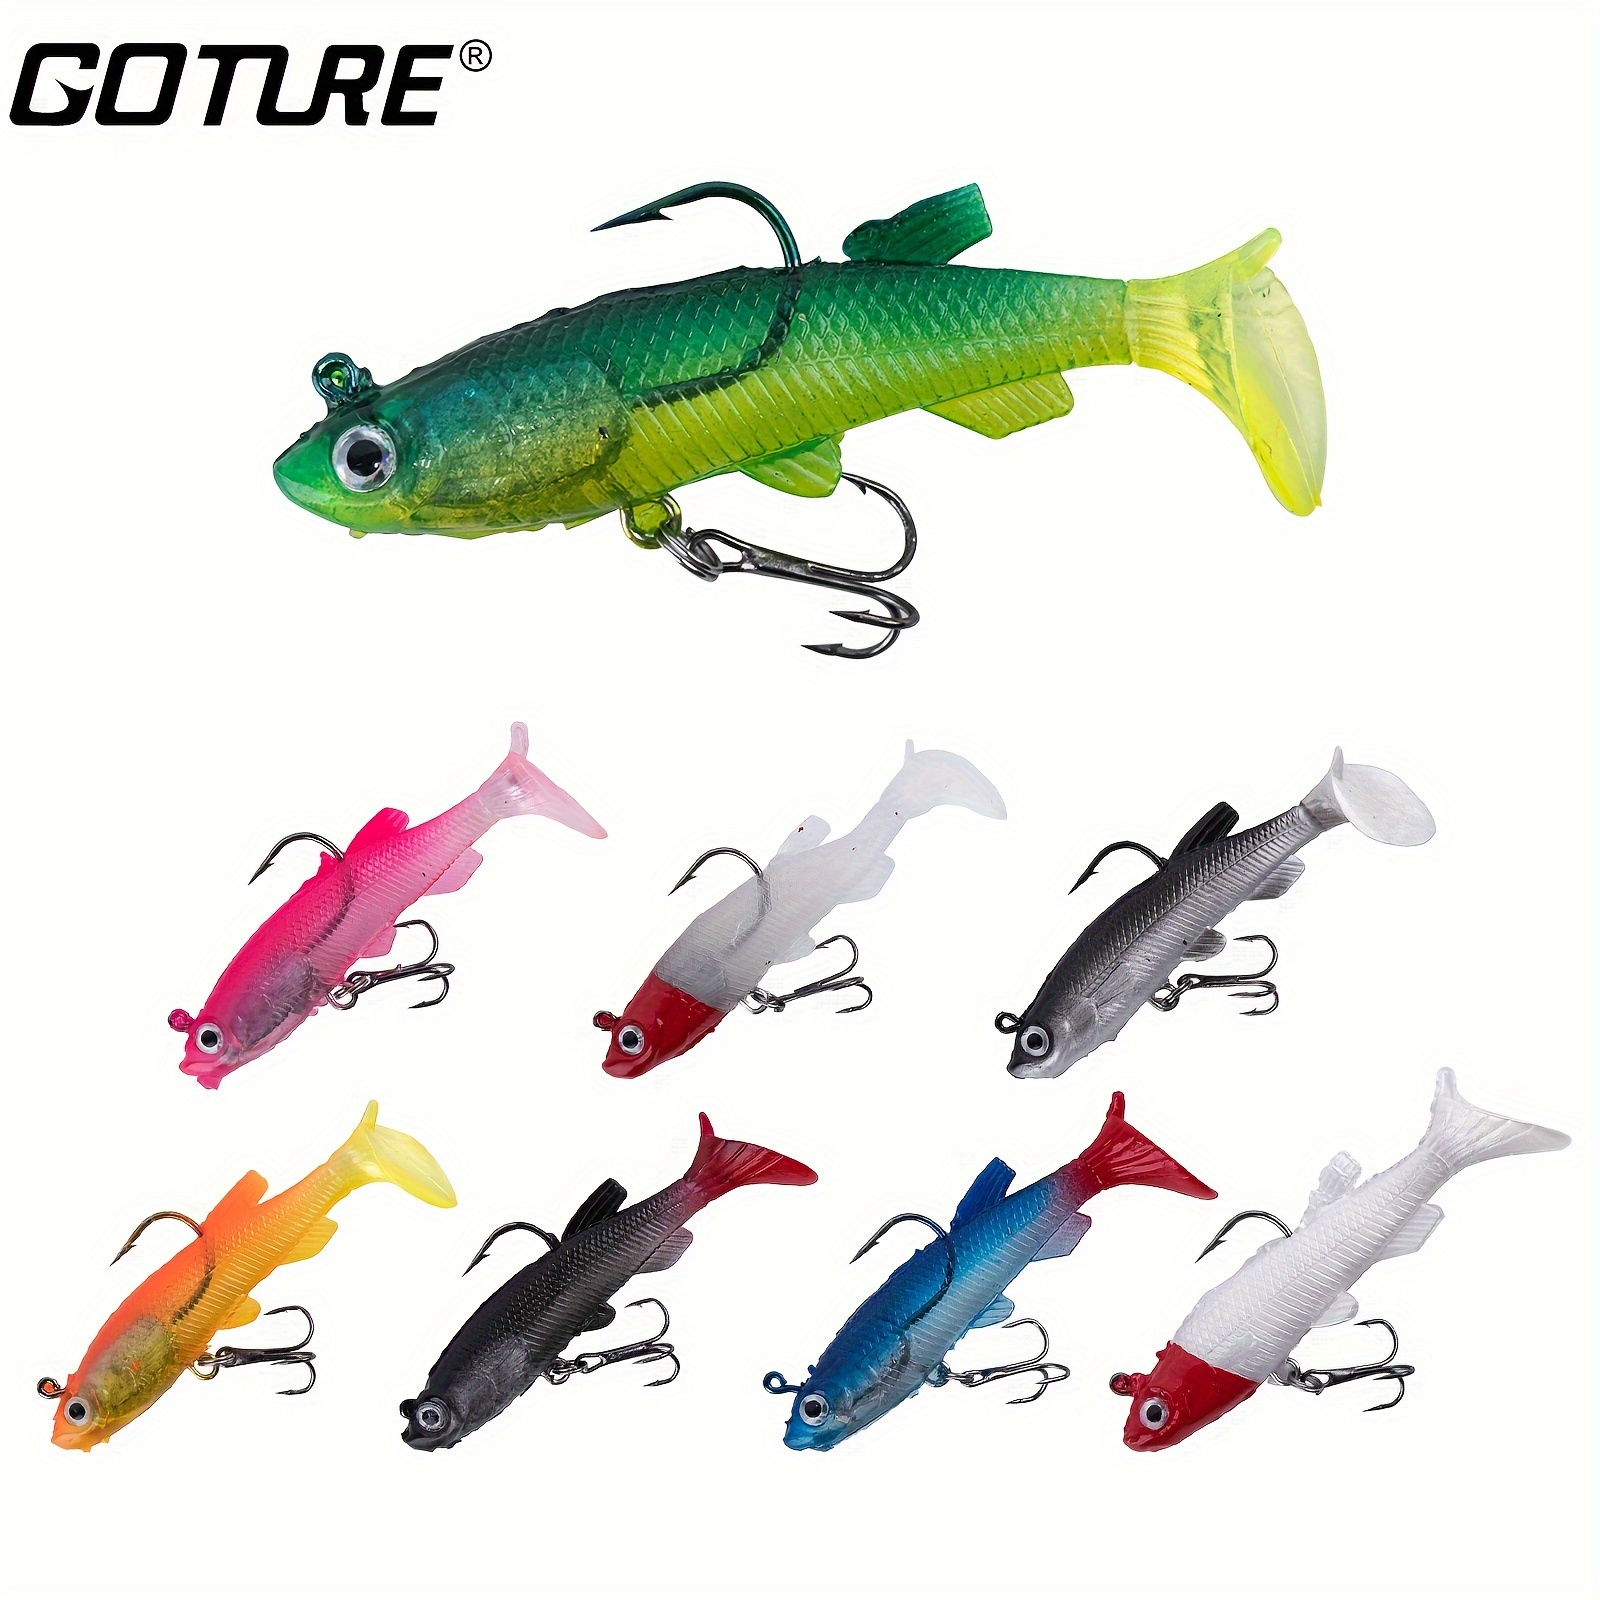 Spinnerbait Fishing Lure Hard Metal Jig Spinner Baits Kits Swimbait for  Bass Trout Pike Salmon Walleye Freshwater Saltwater 5pcs/Pack 5 Pack (3/8oz)